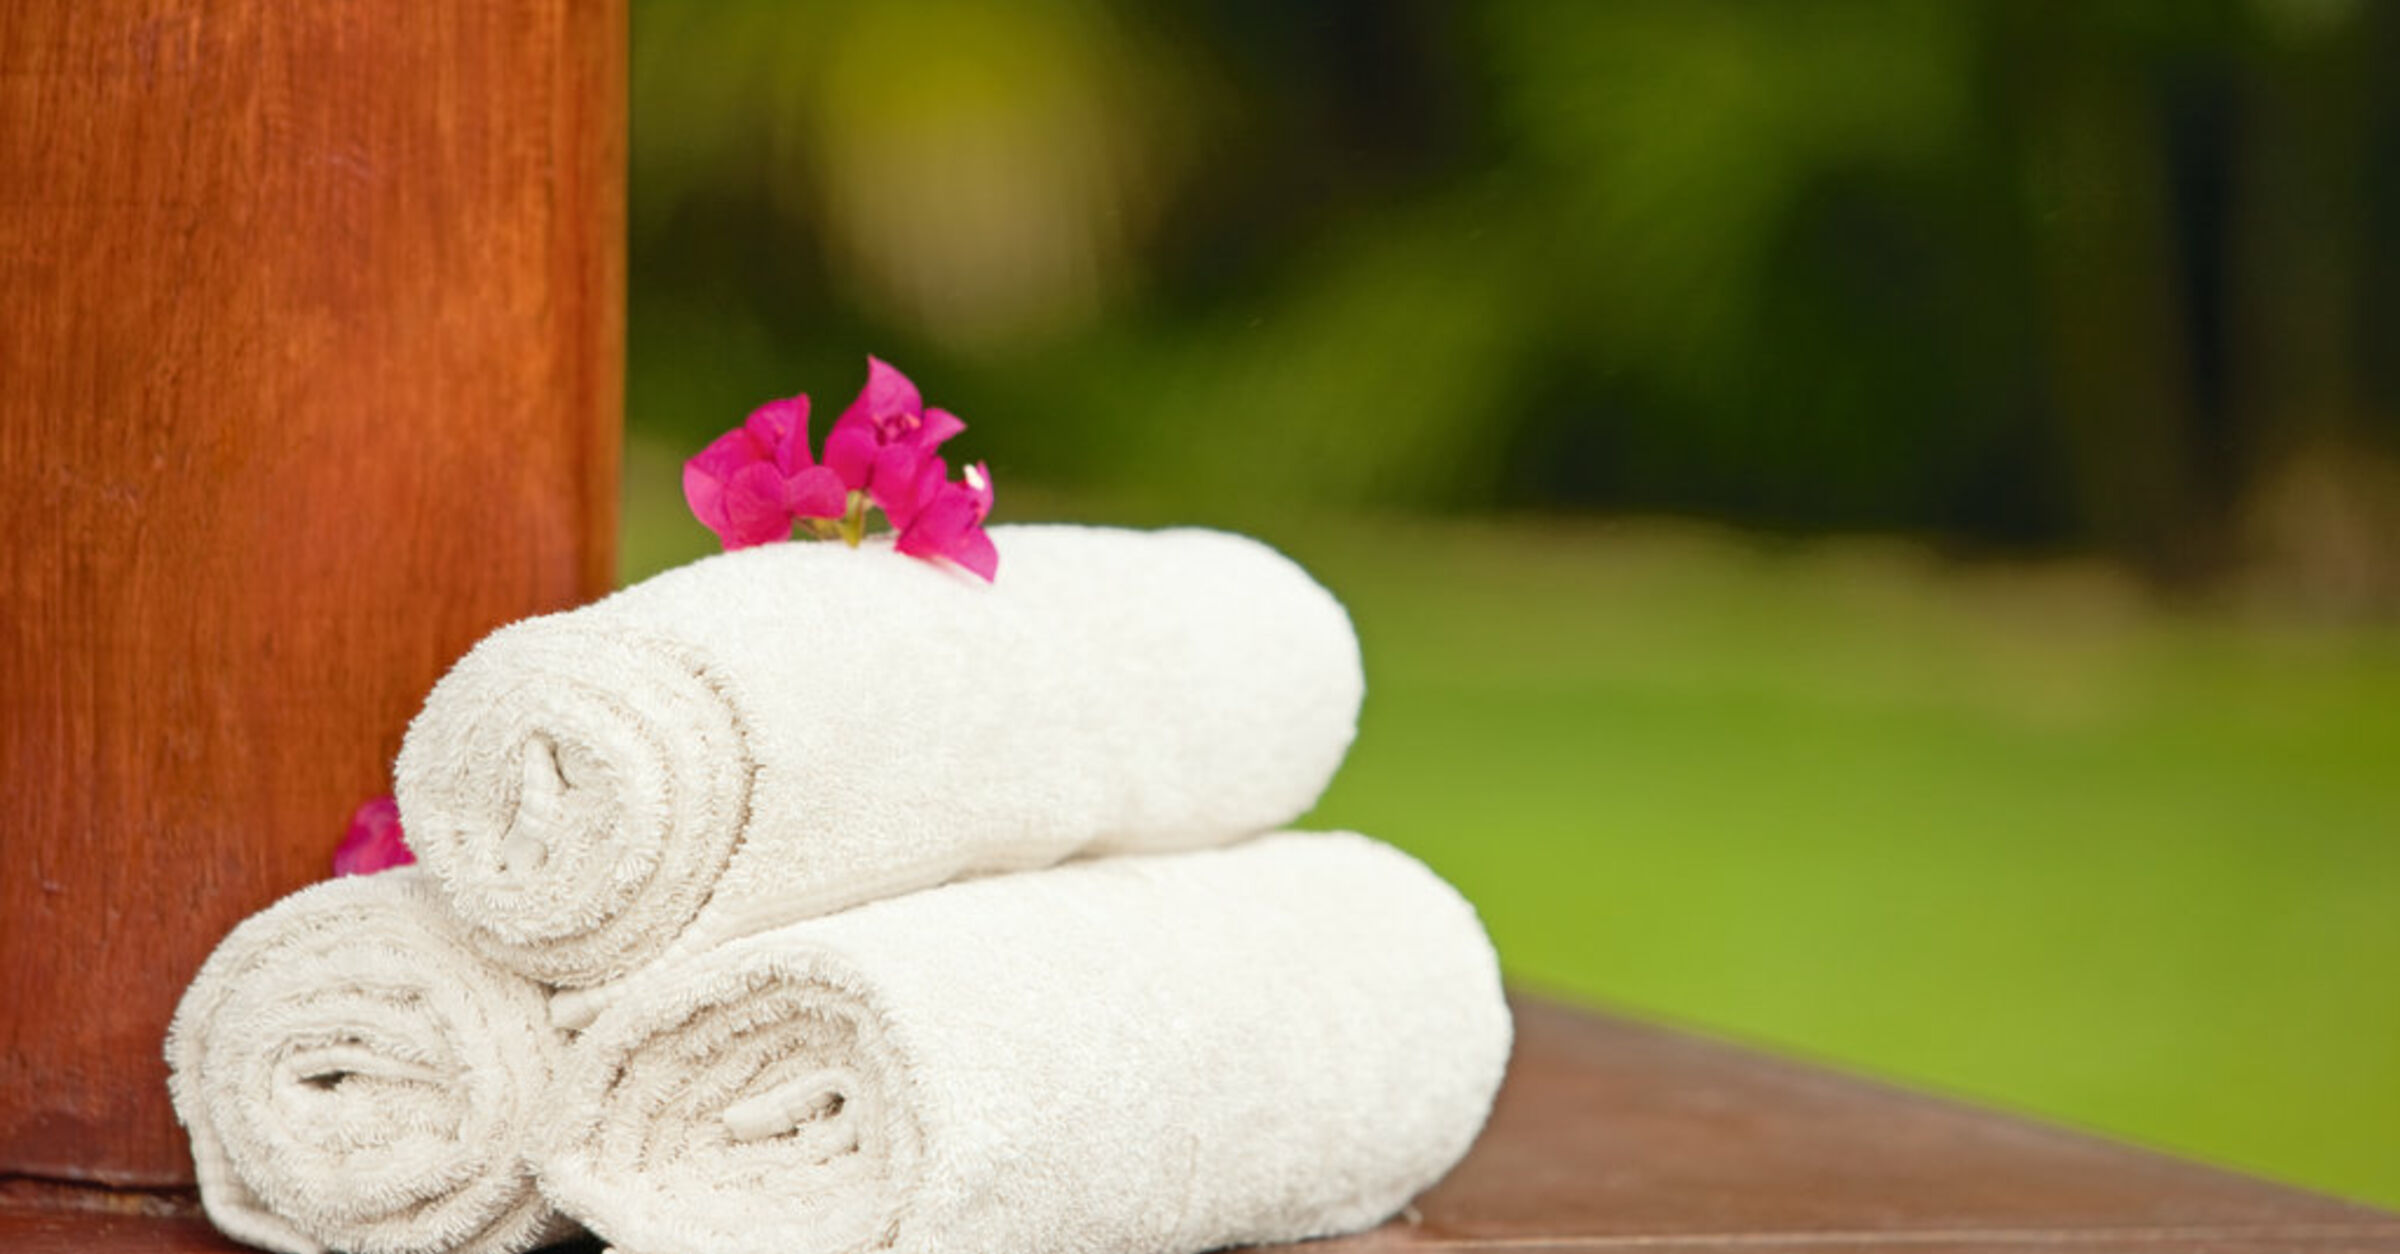 Study on the re-use of hotel towels: Force of habit saves laundry and ...